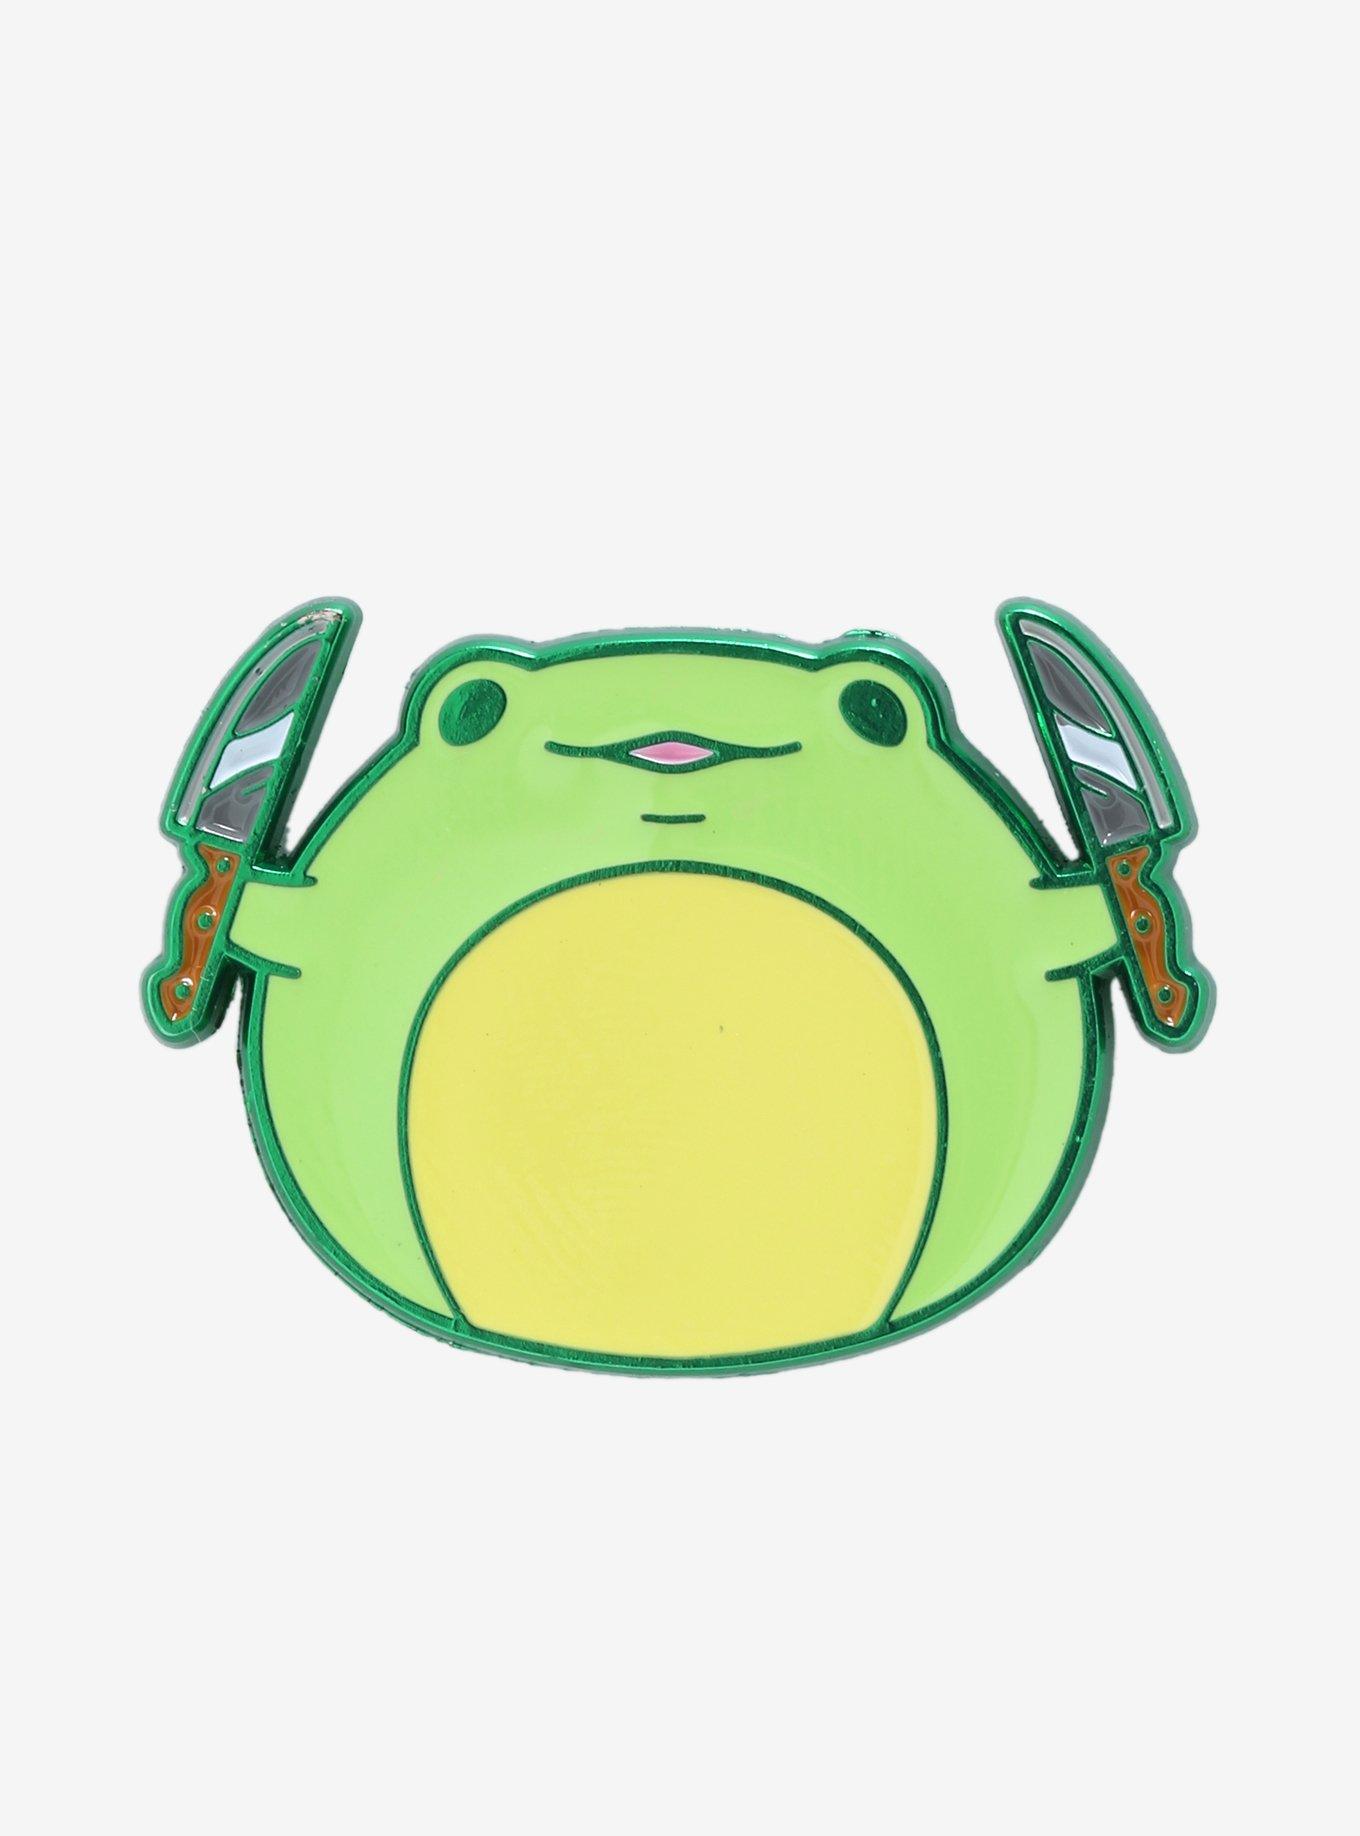 Cute Frog With A Knife | Backpack